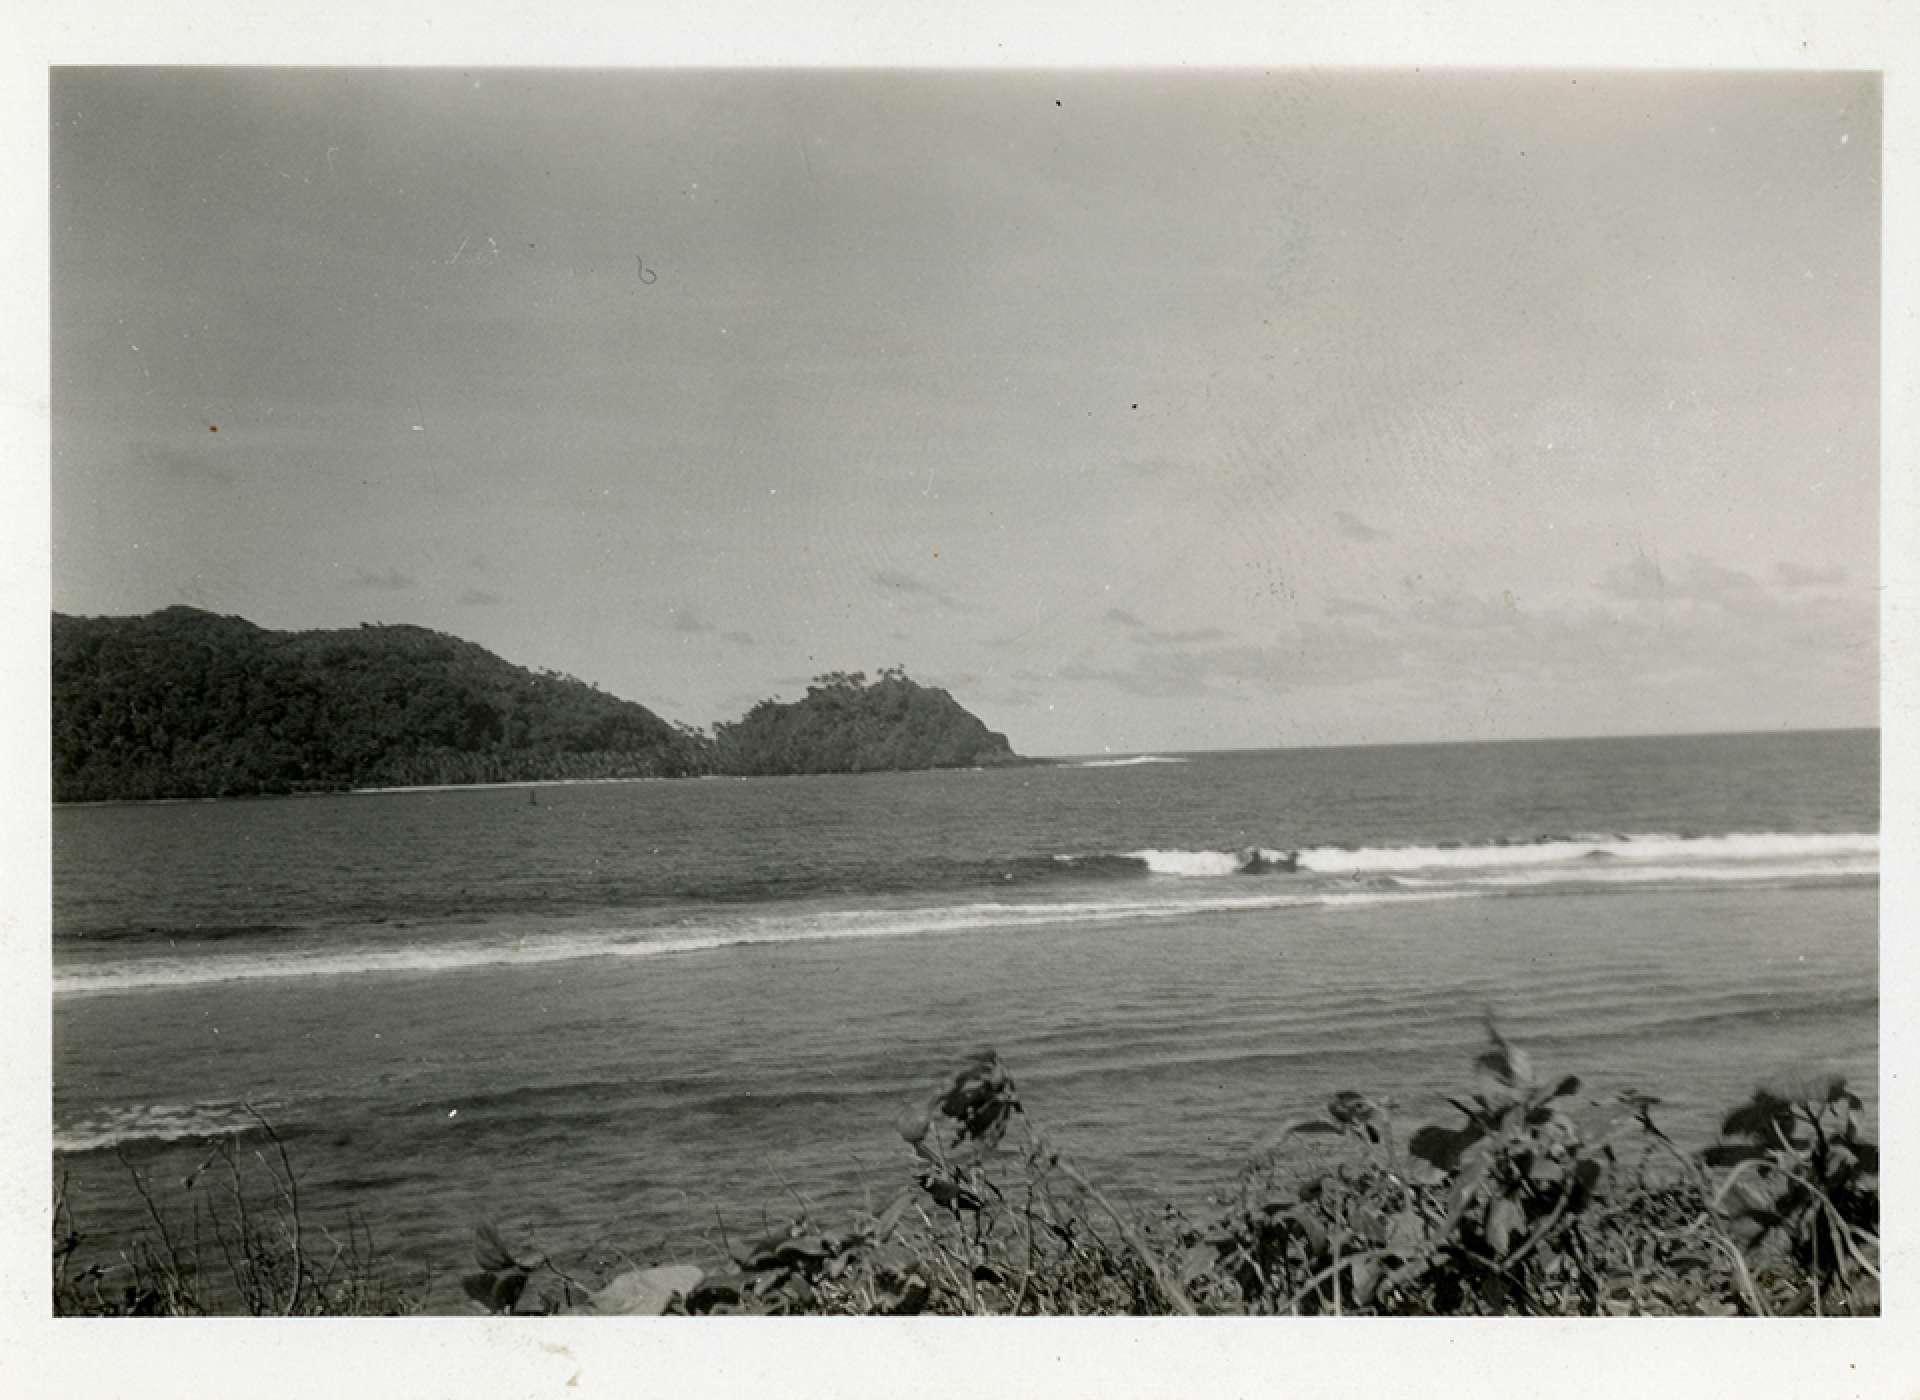 A view across a bay to a cove, Hawaii, July 1941